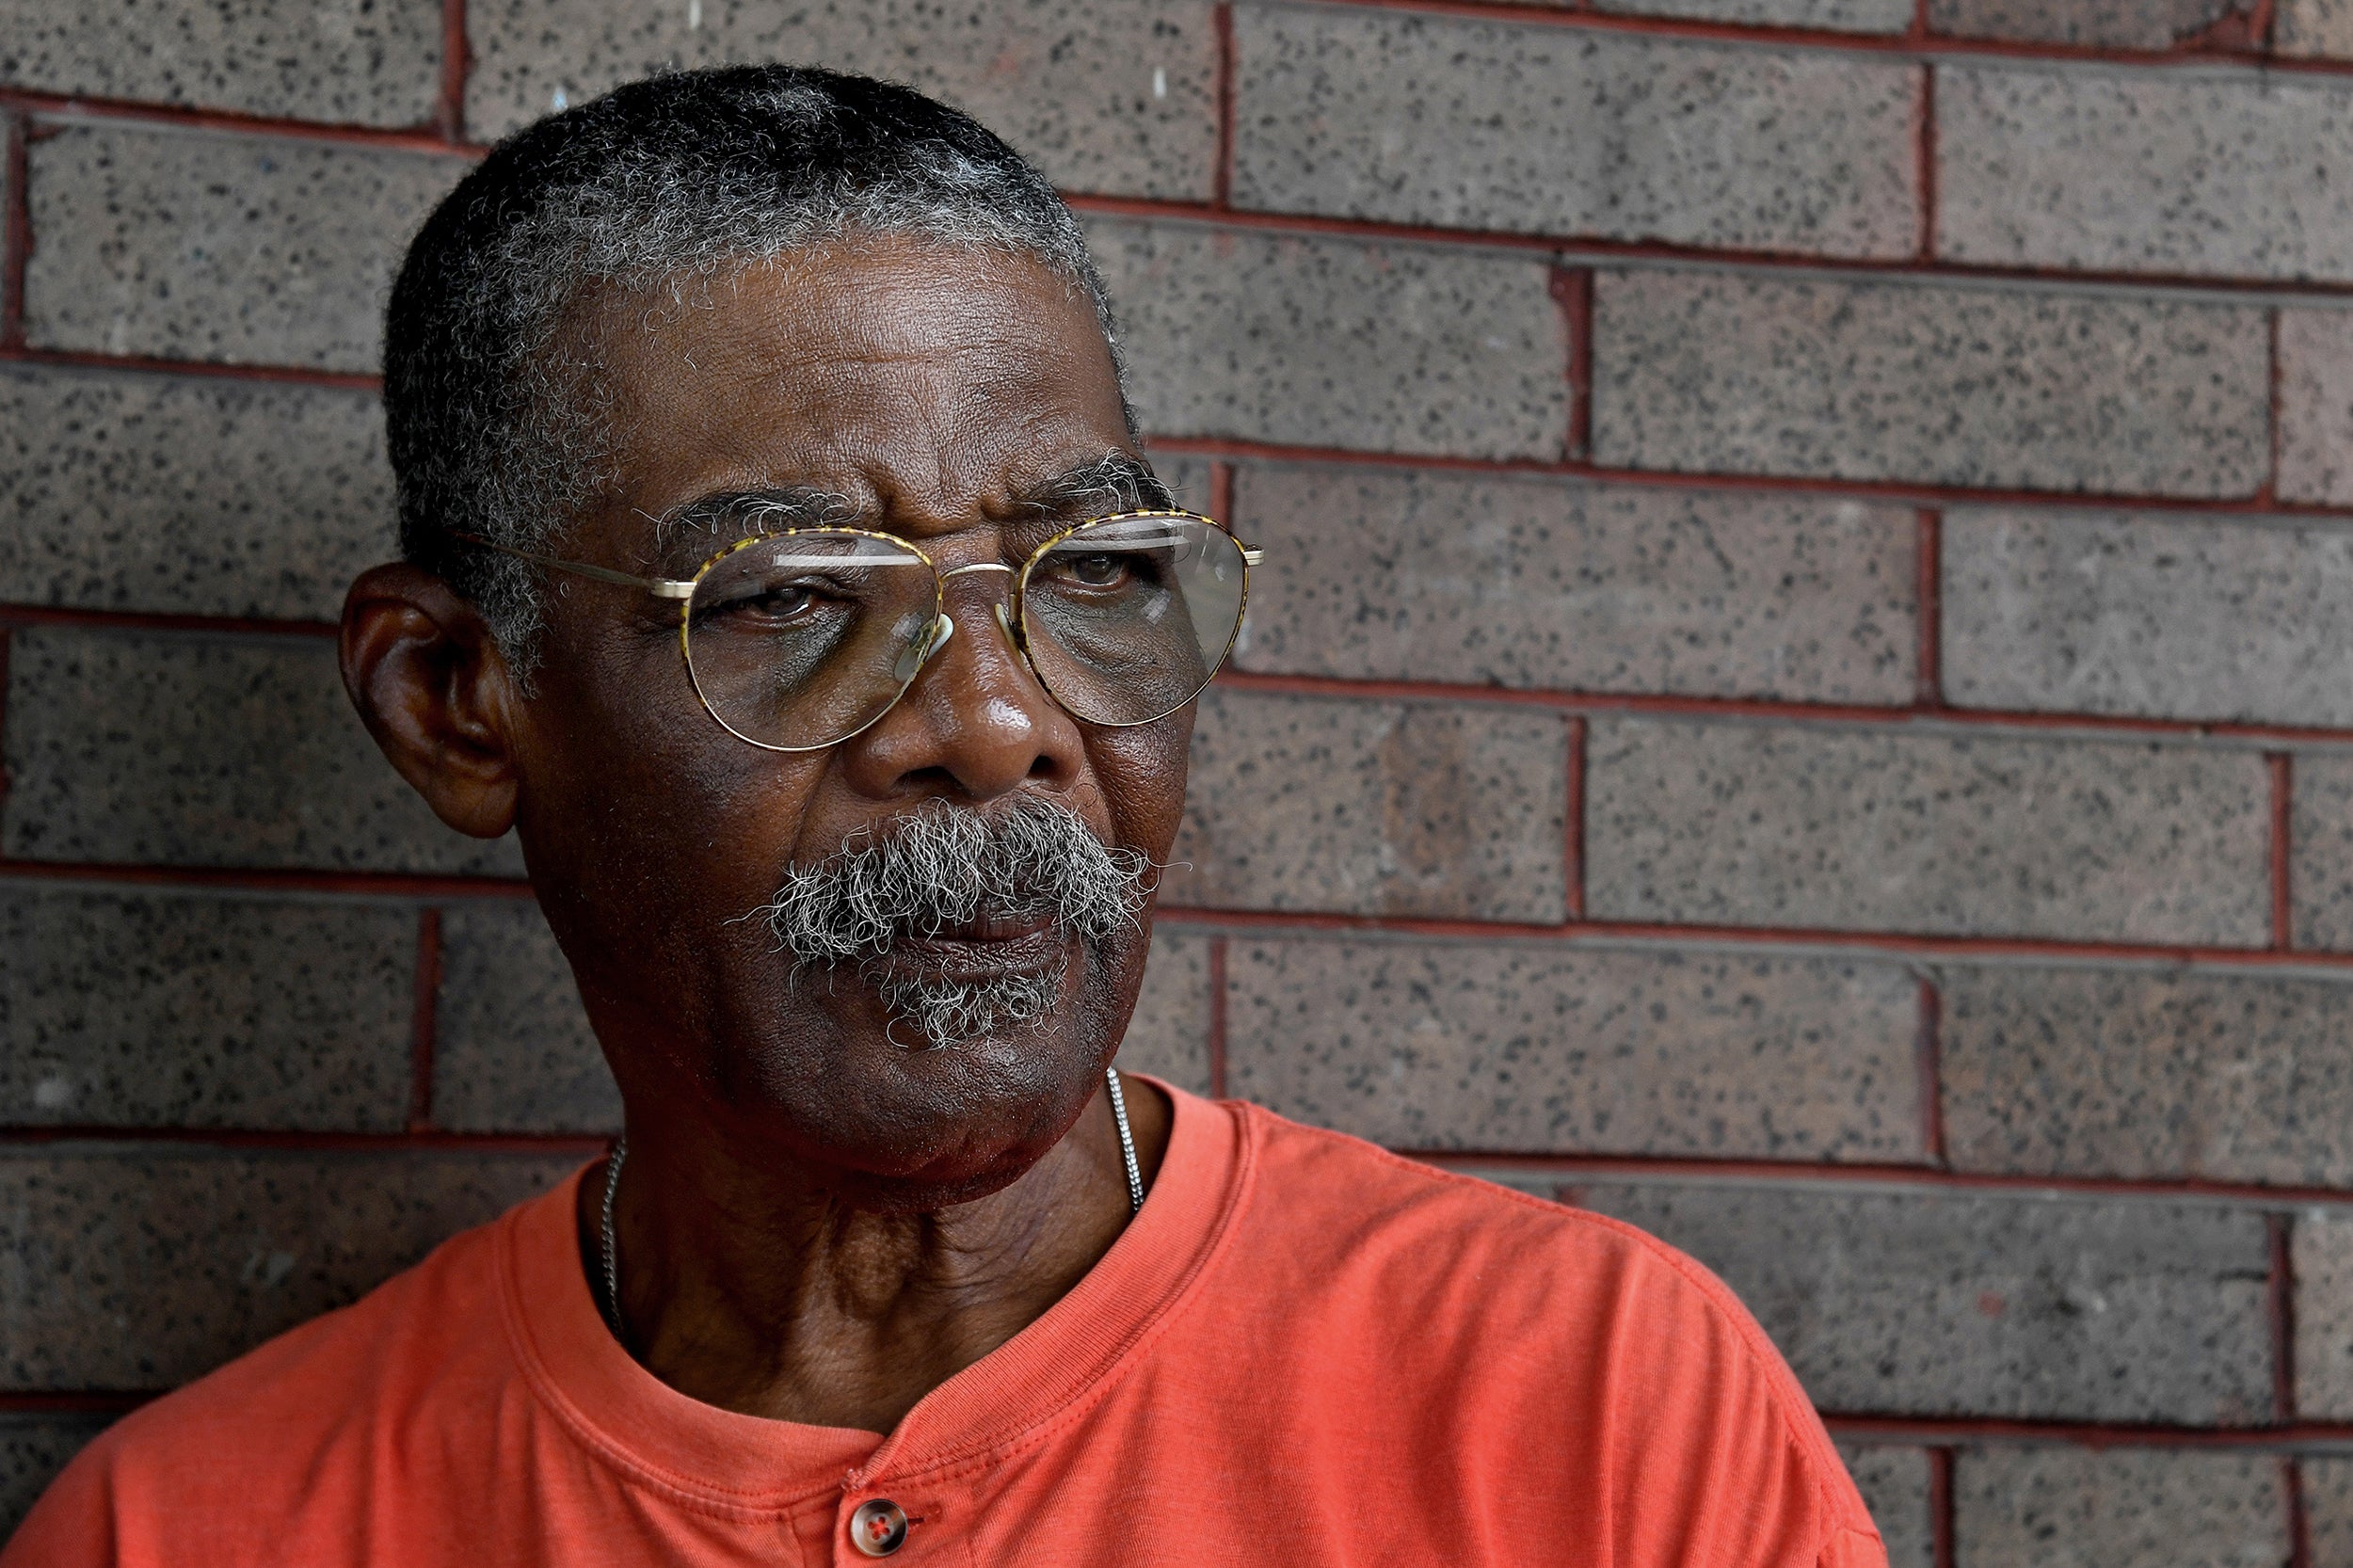 Joseph Cuffie, a 79-year-old friend and neighbour of Tate's